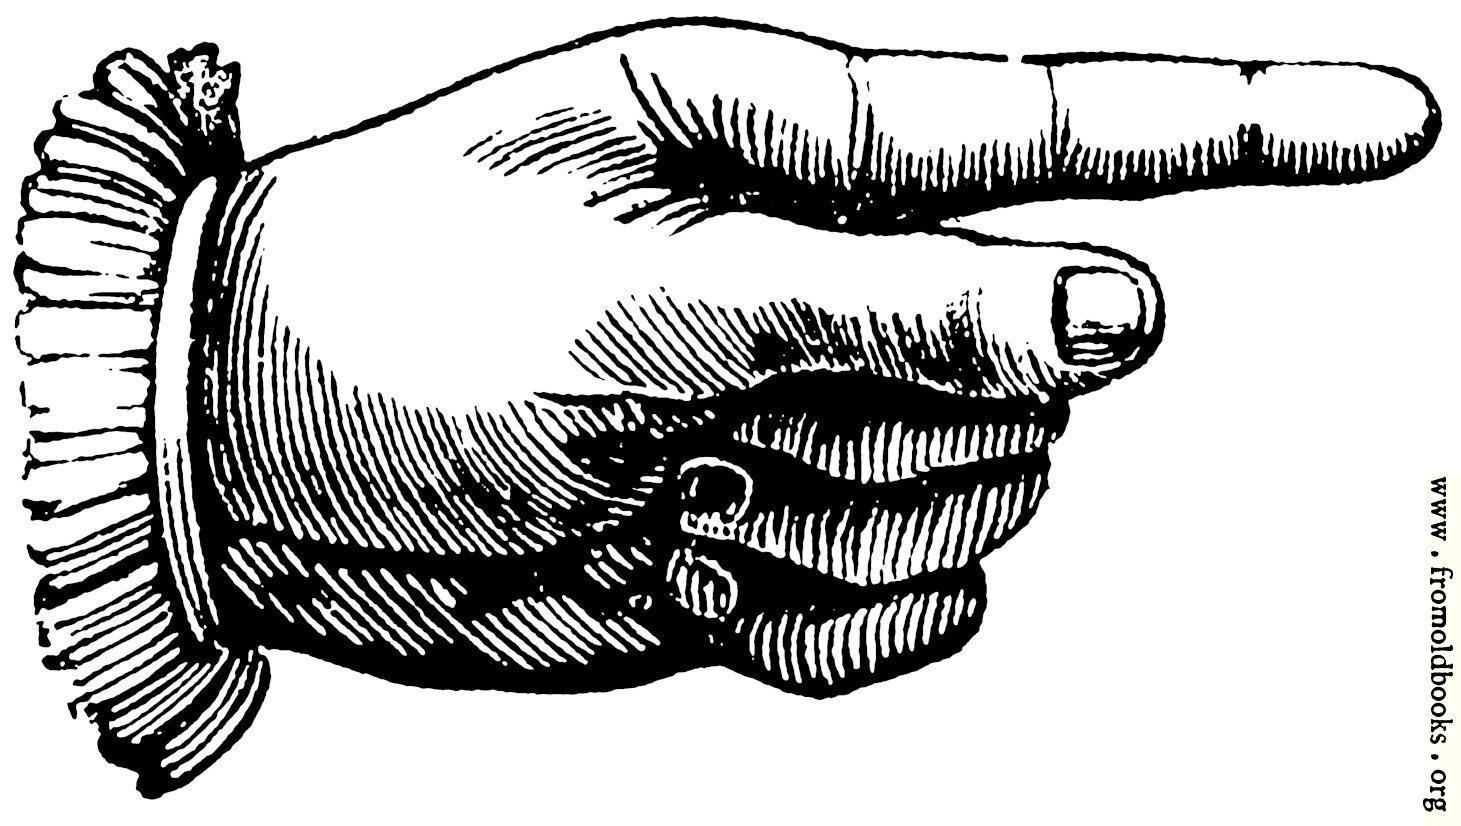 [Picture: Index, manicule, or pointing hand]